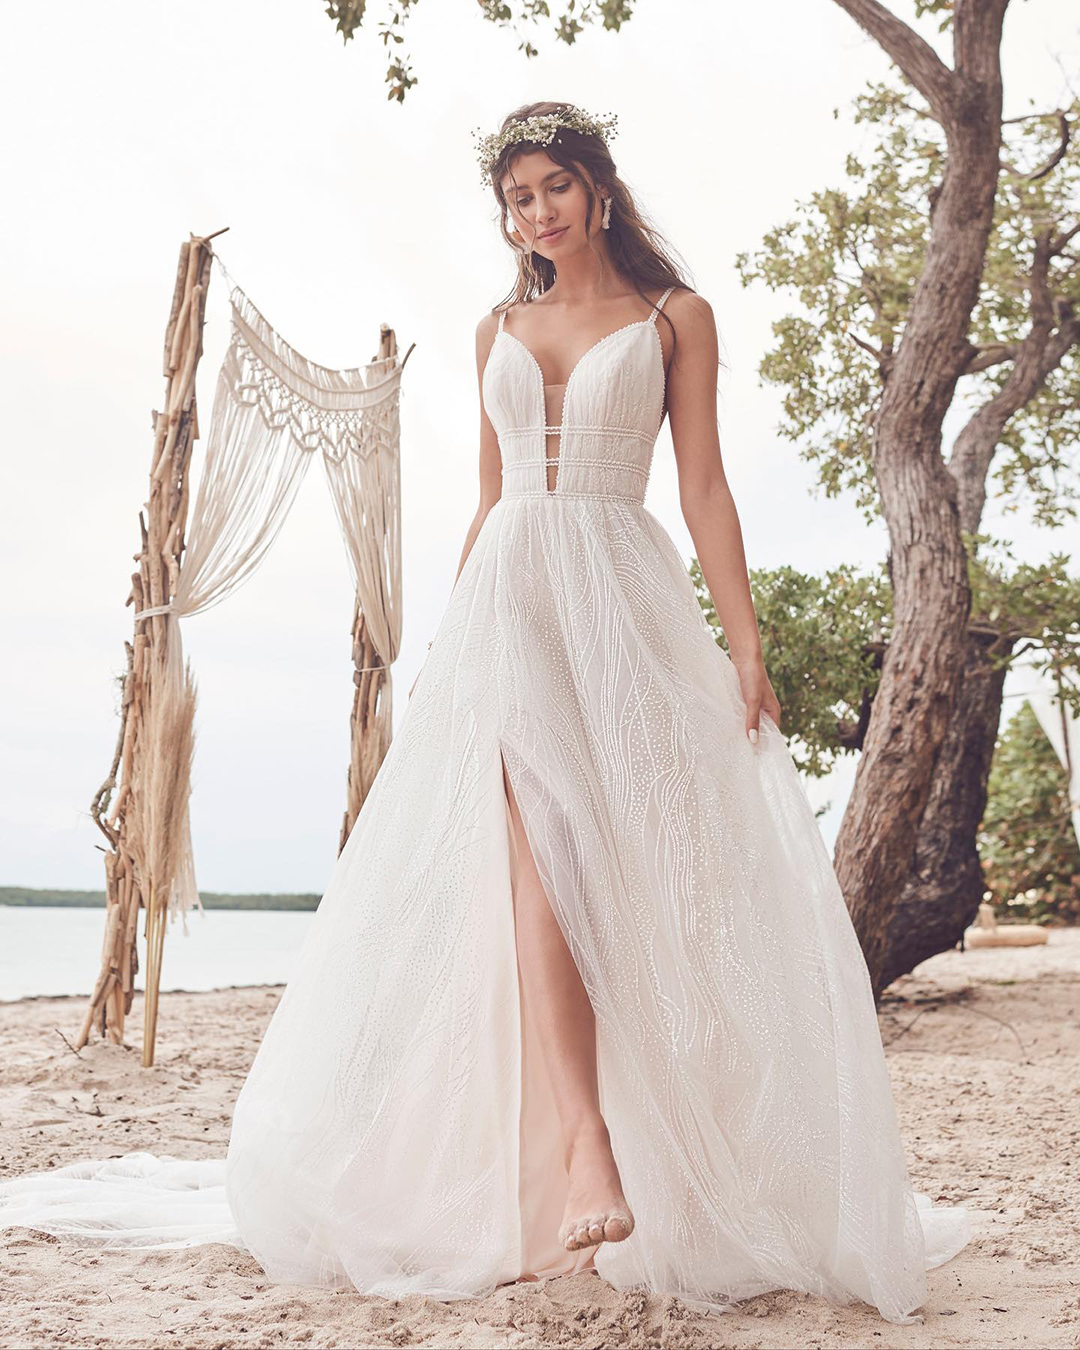 destination wedding dresses with spaghetti straps sexy maggiesotterodesigns